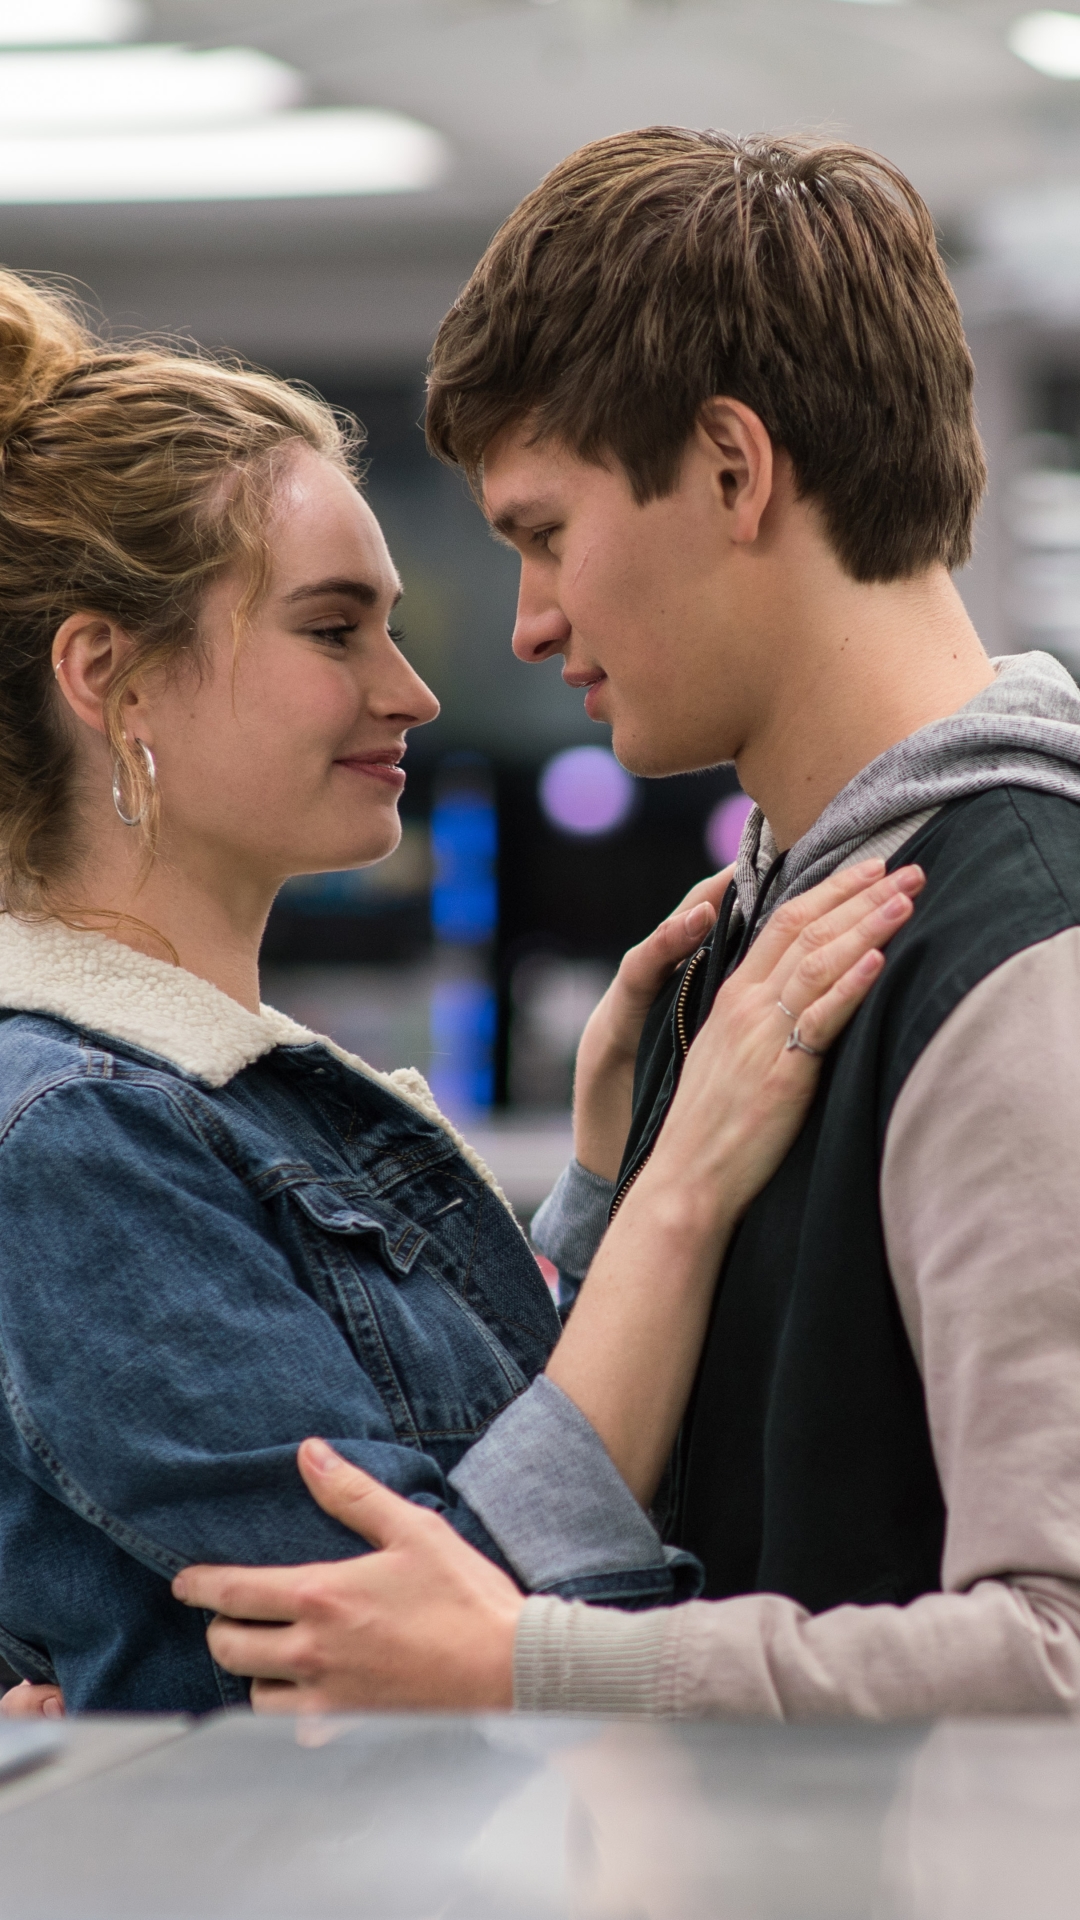 movie, baby driver, lily james, ansel elgort, baby (baby driver), debora (baby driver)